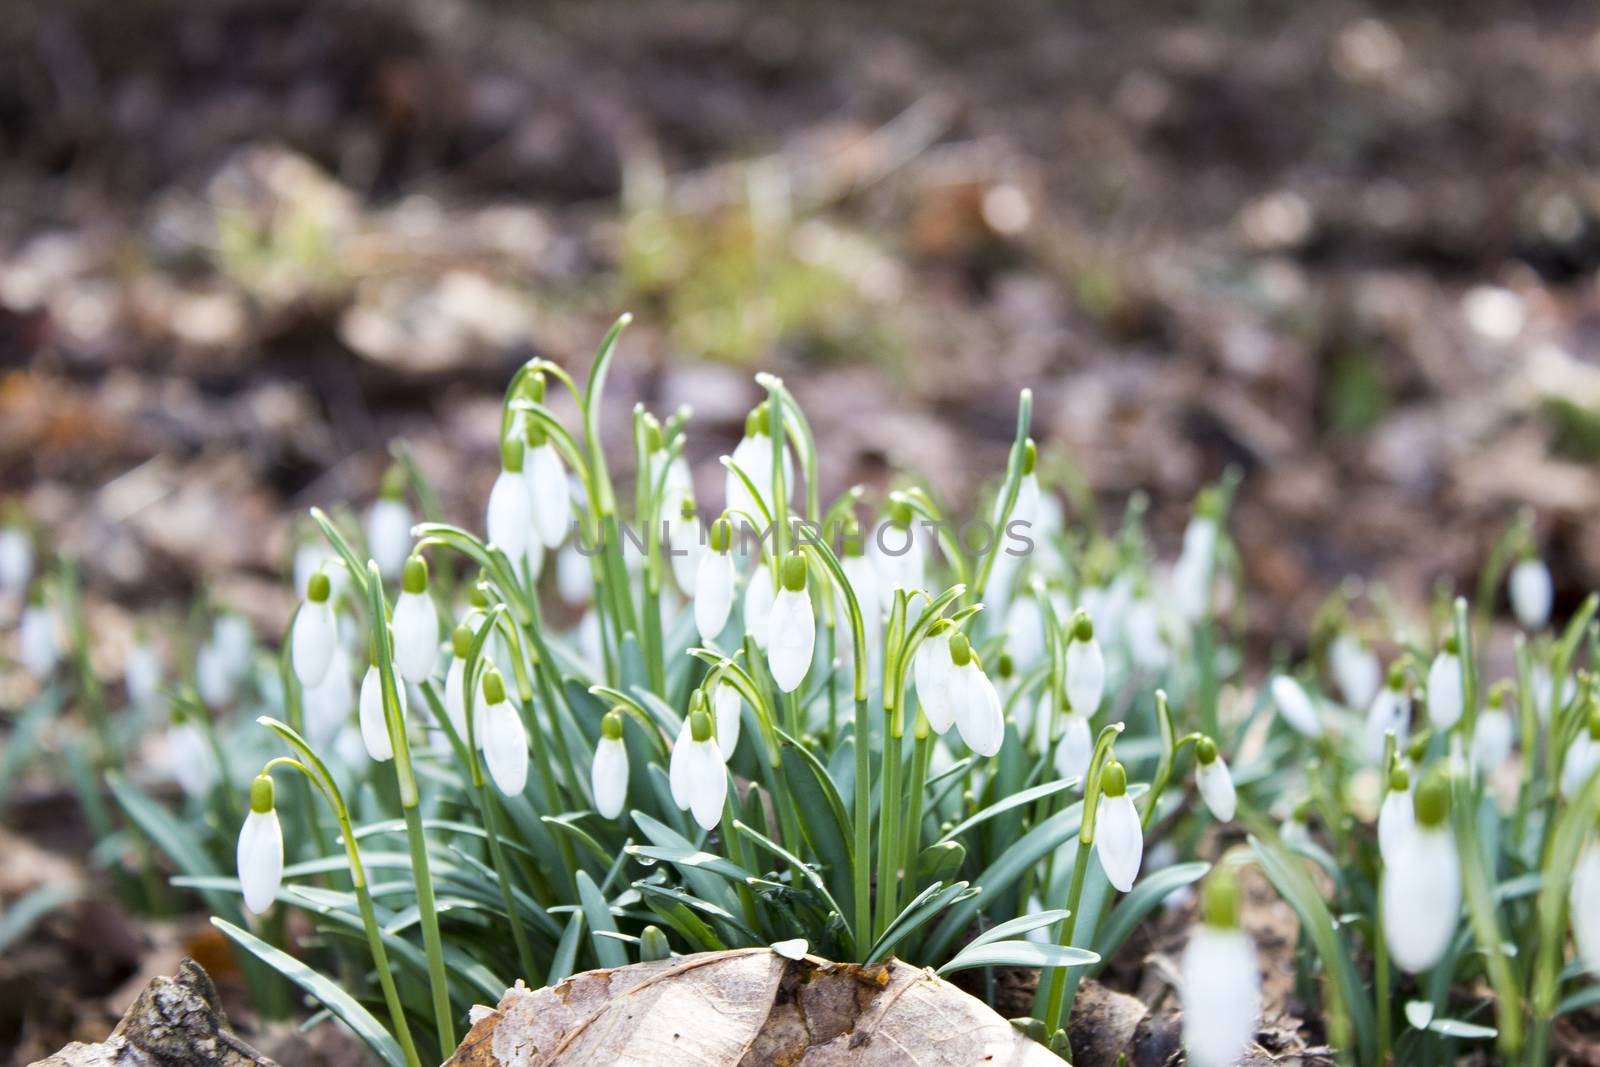 A close up picture of snowdrops during fall with bokeh background